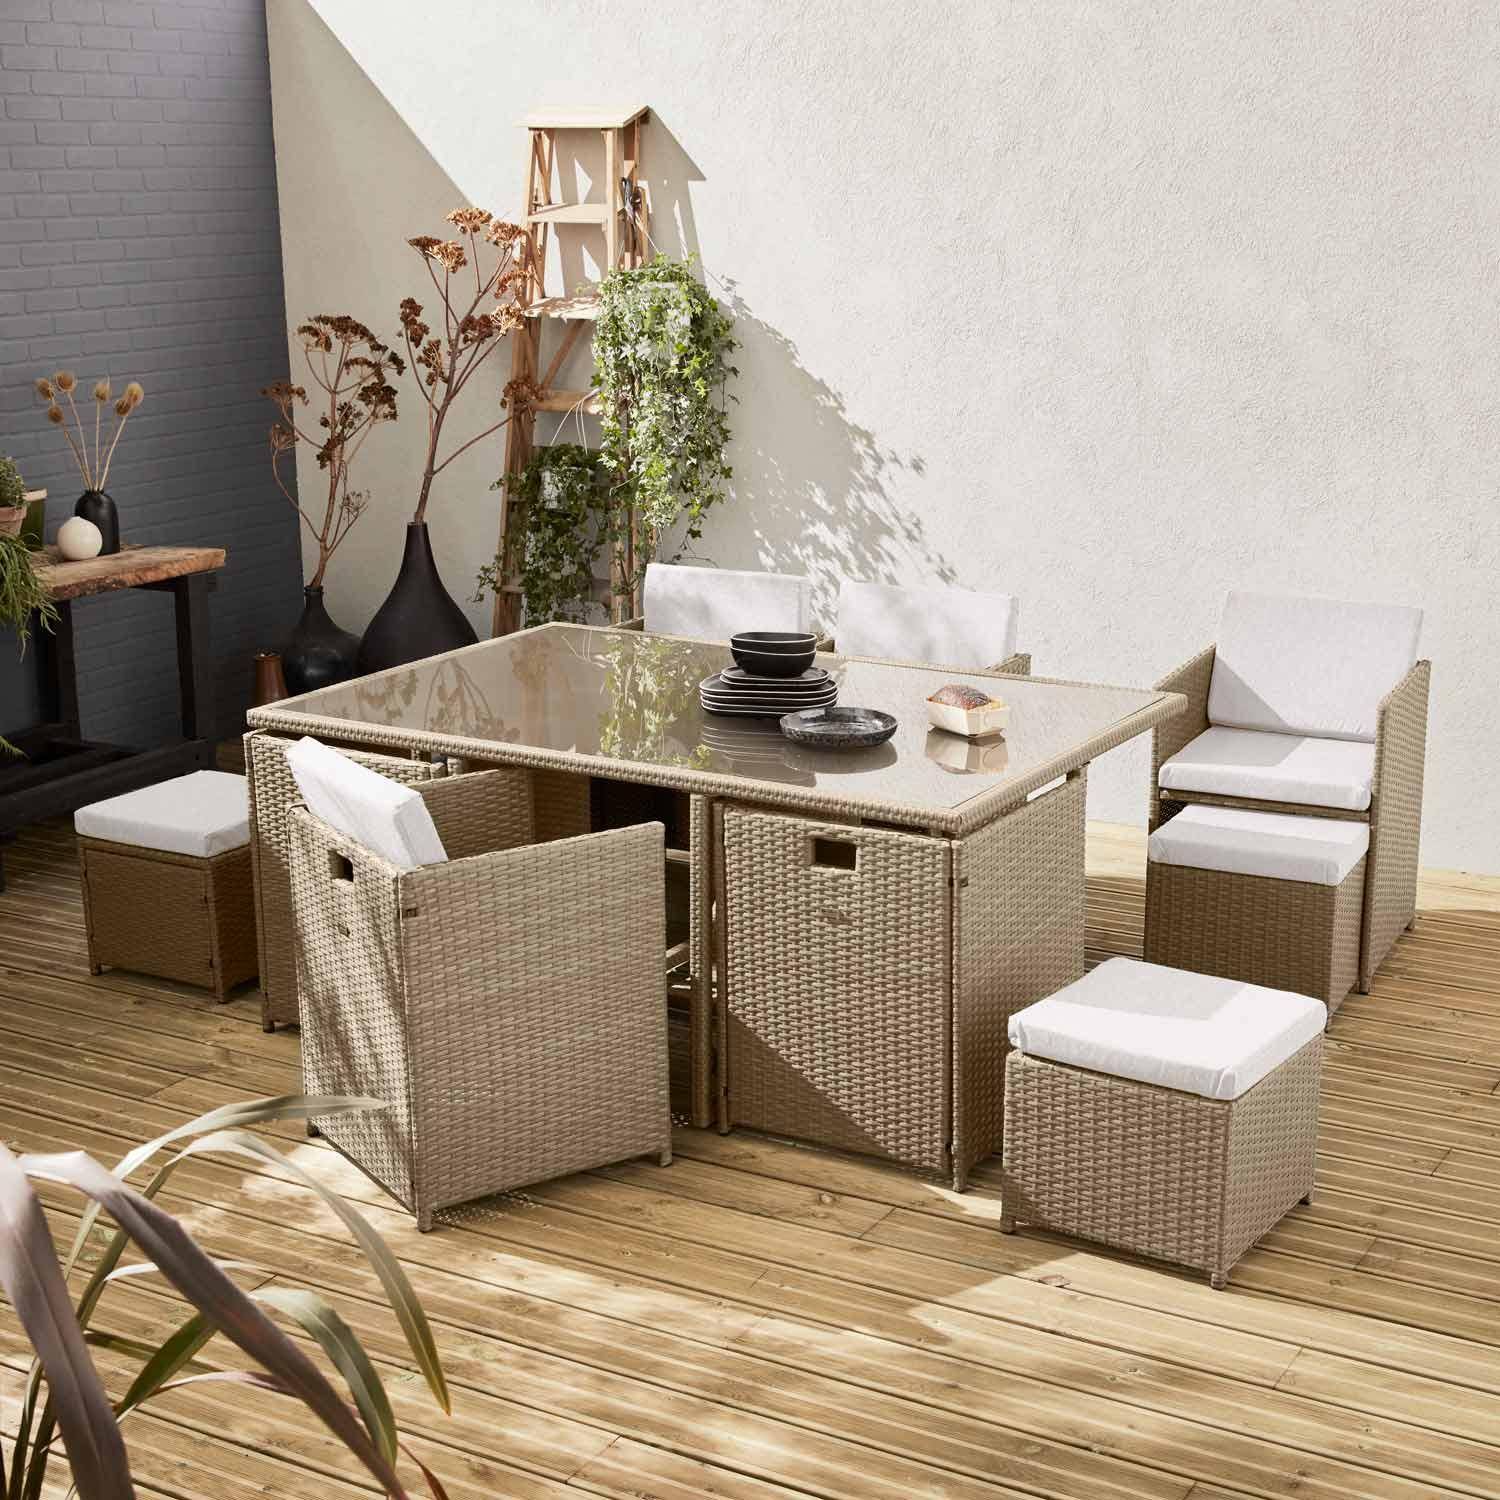 6 to 10-seater rattan cube table set - table, 6 armchairs, 2 footstools - Vabo 10 - Beige rattan, Beige cushions,sweeek,Photo1